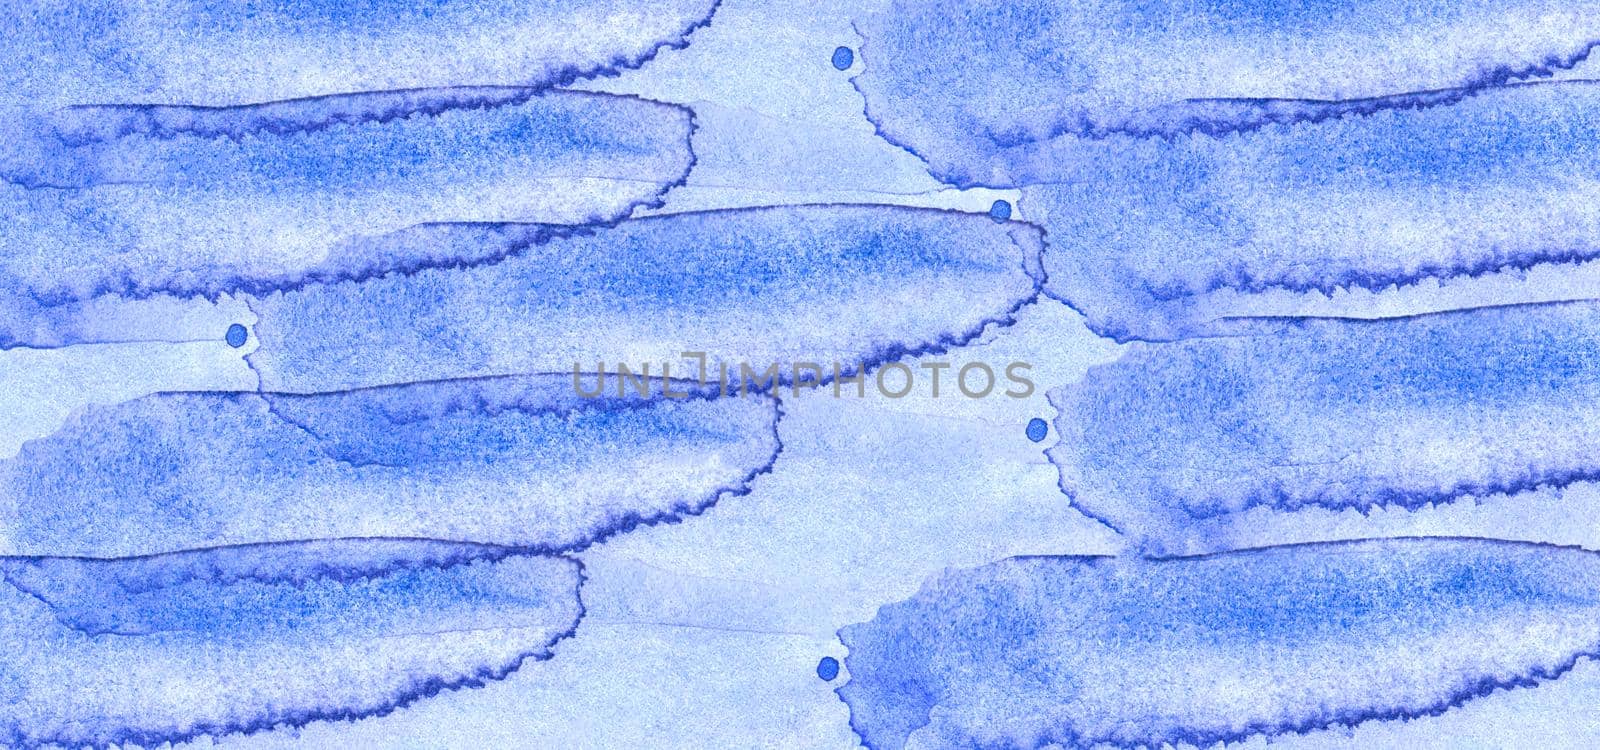 Abstract watercolor painting. Blue wavy texture.